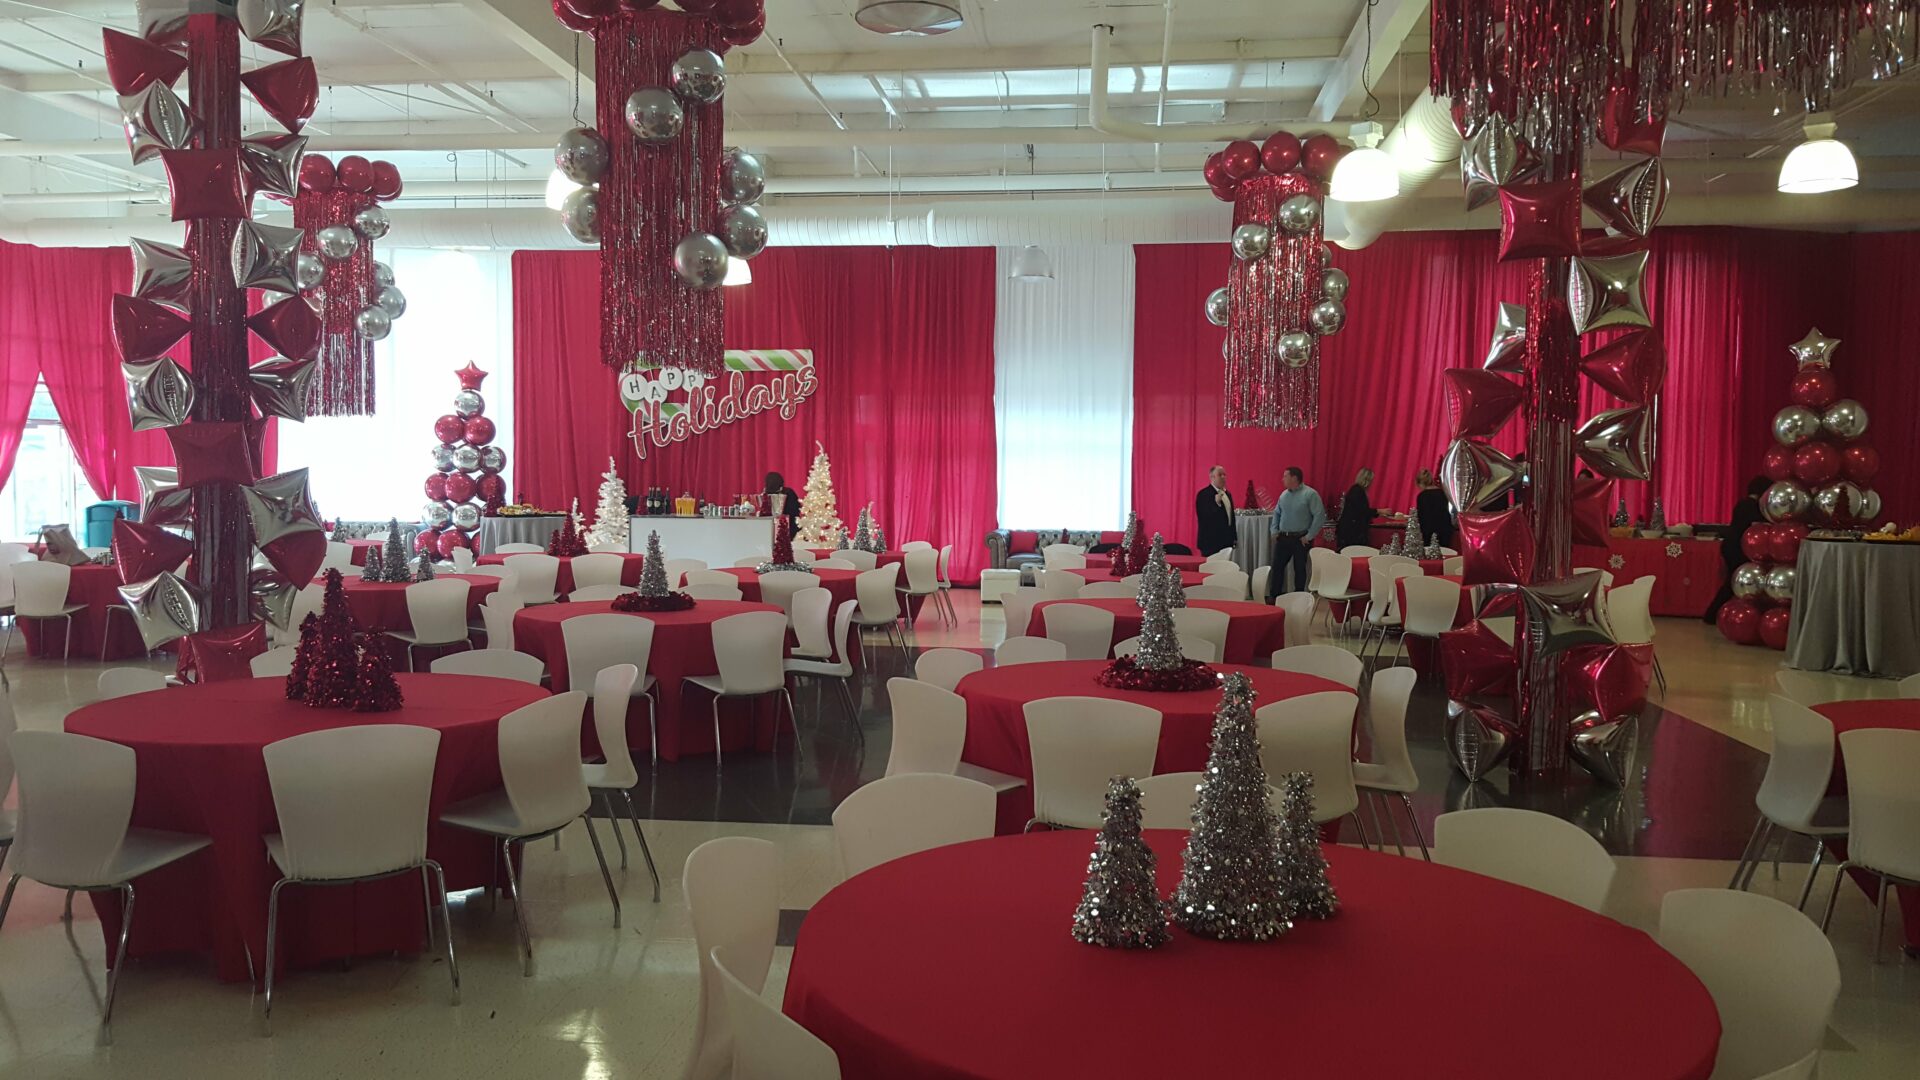 A room with red and white tables, chairs, and balloons.